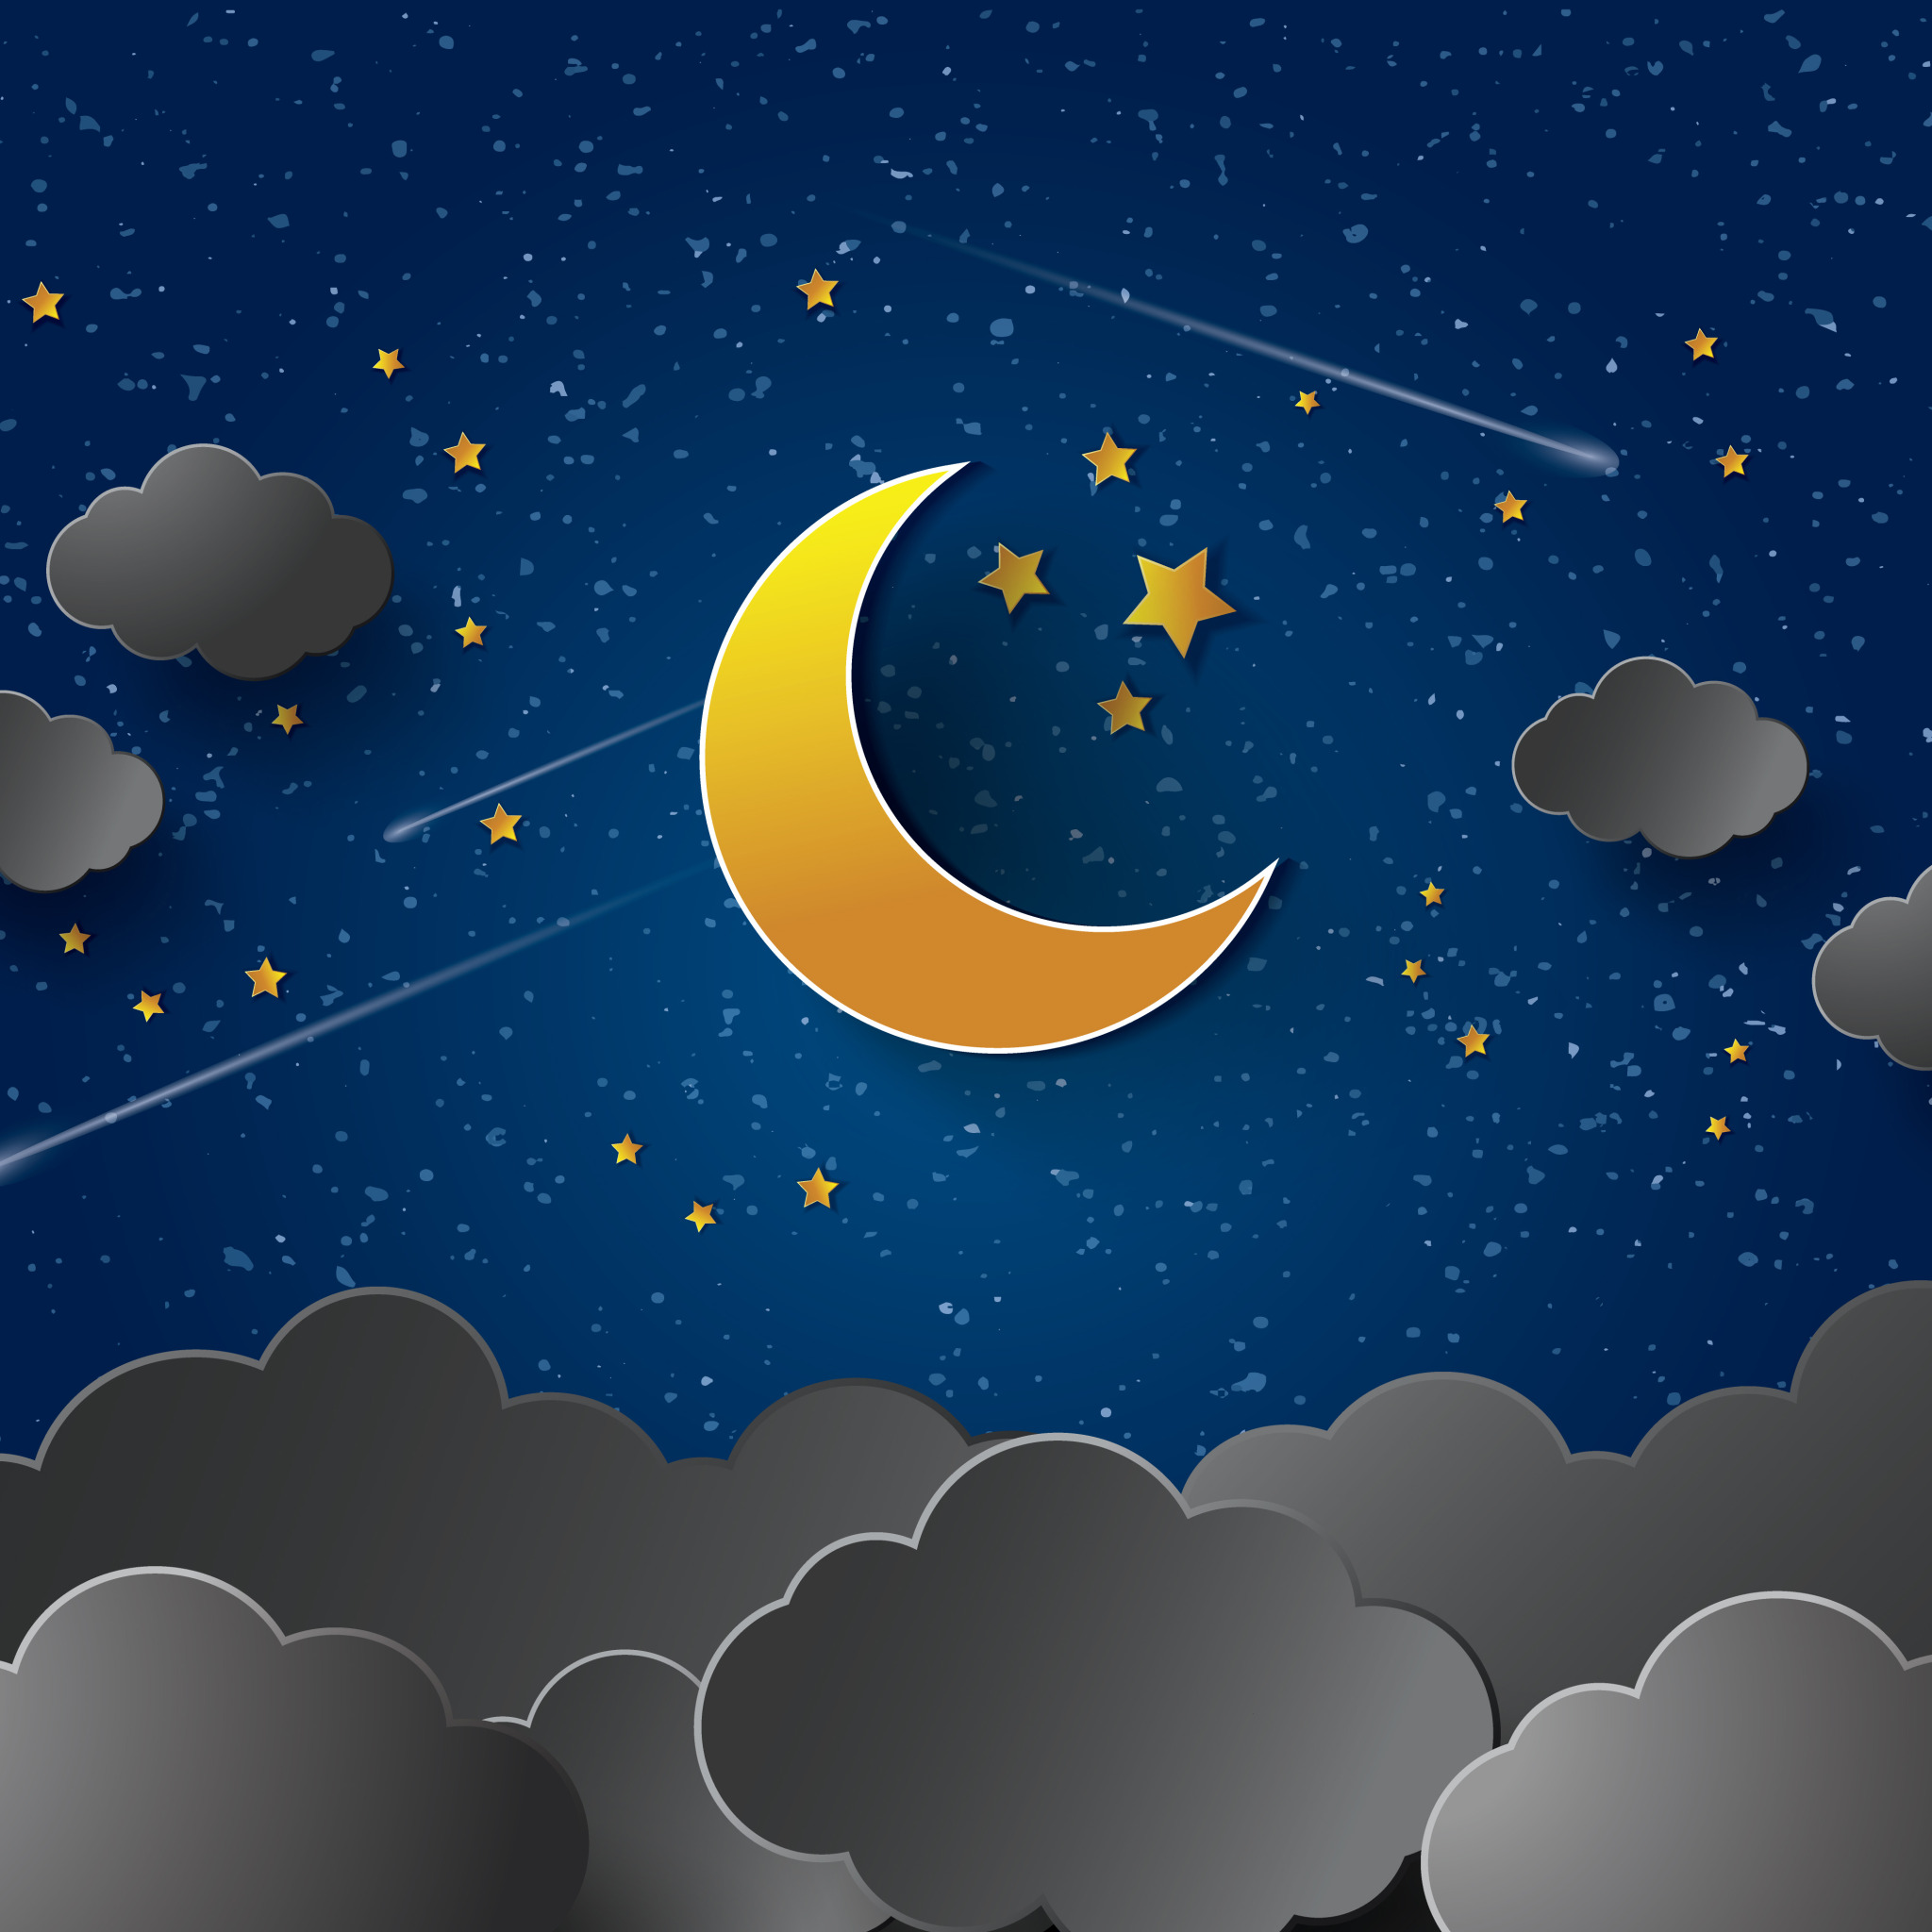 Download wallpaper stars, night, clouds, the moon, section rendering in res...